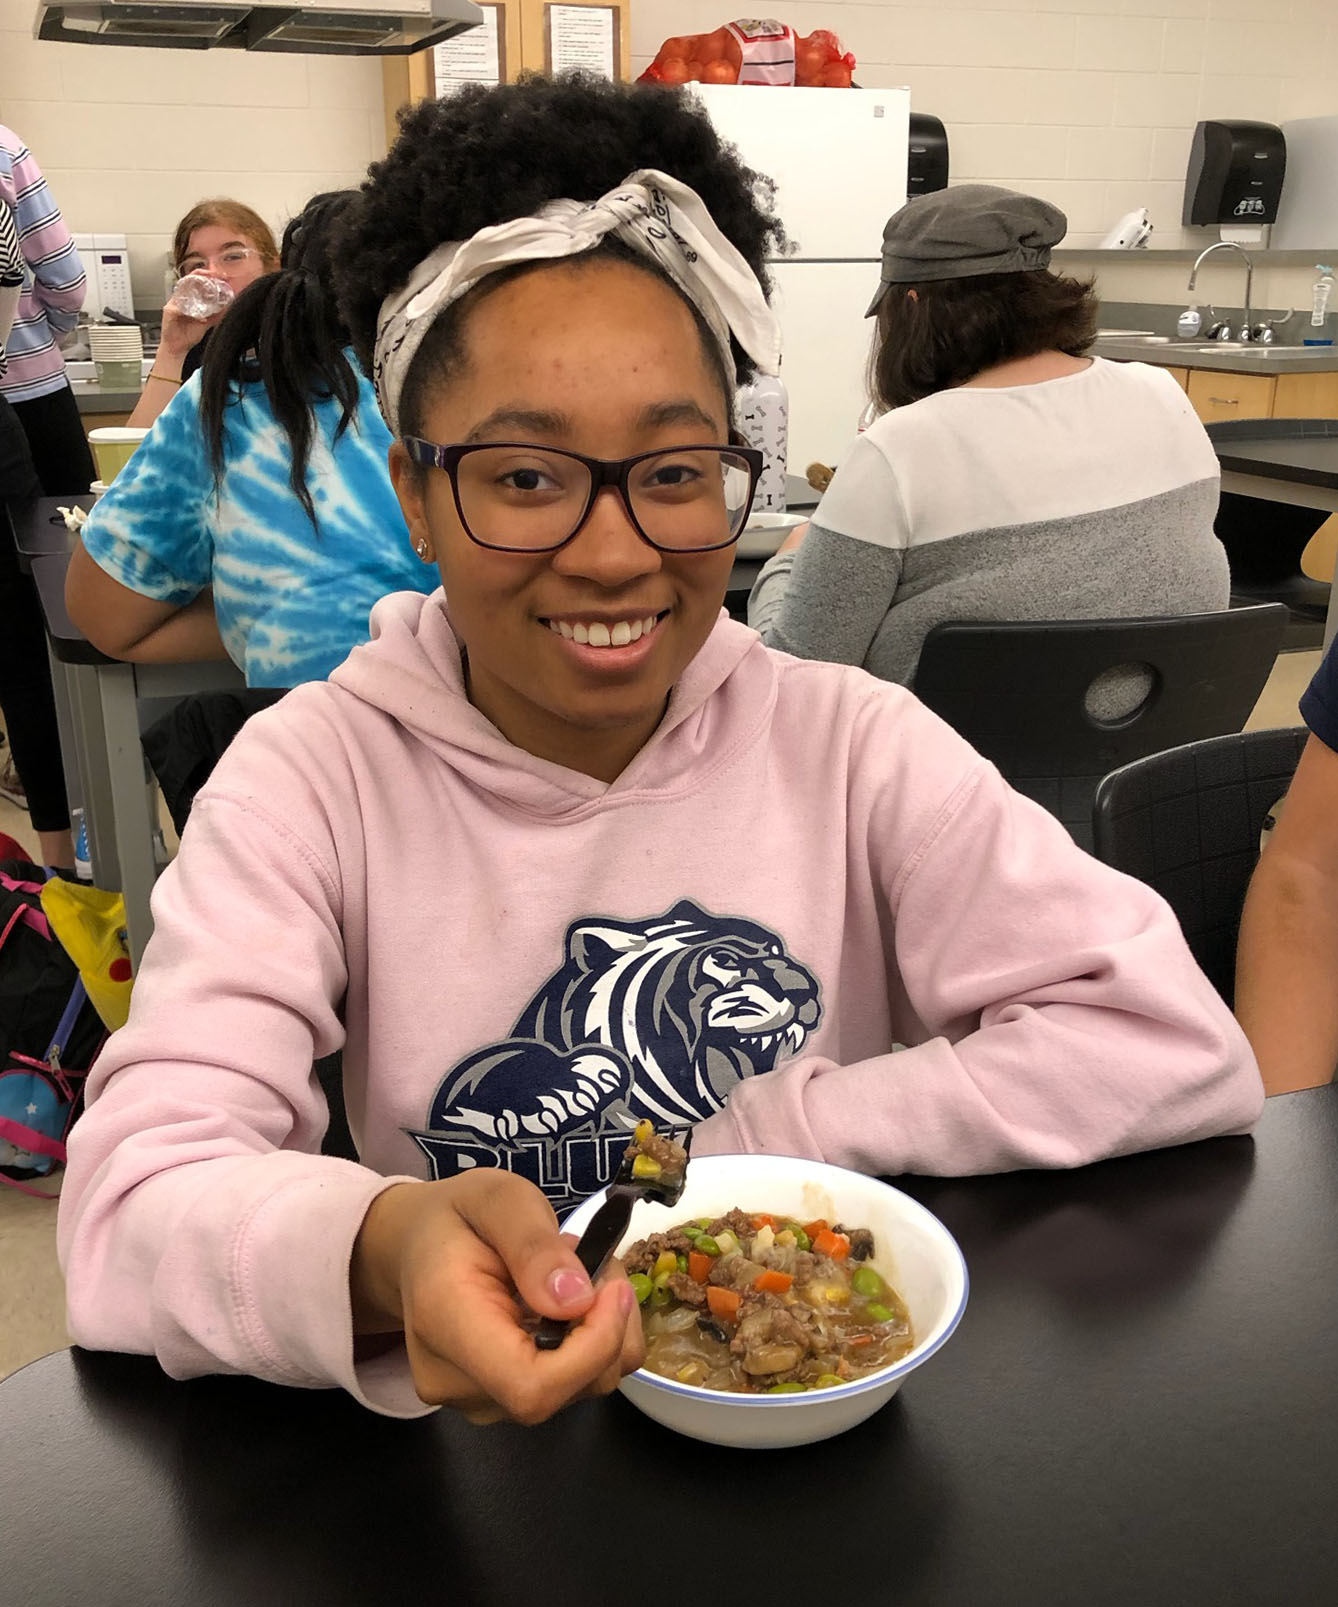 Student MiJah McQuitty enjoys her ramen after cooking the noodles, warming up and flavoring the broth, and prepping vegetables and protein to make her dish healthier.